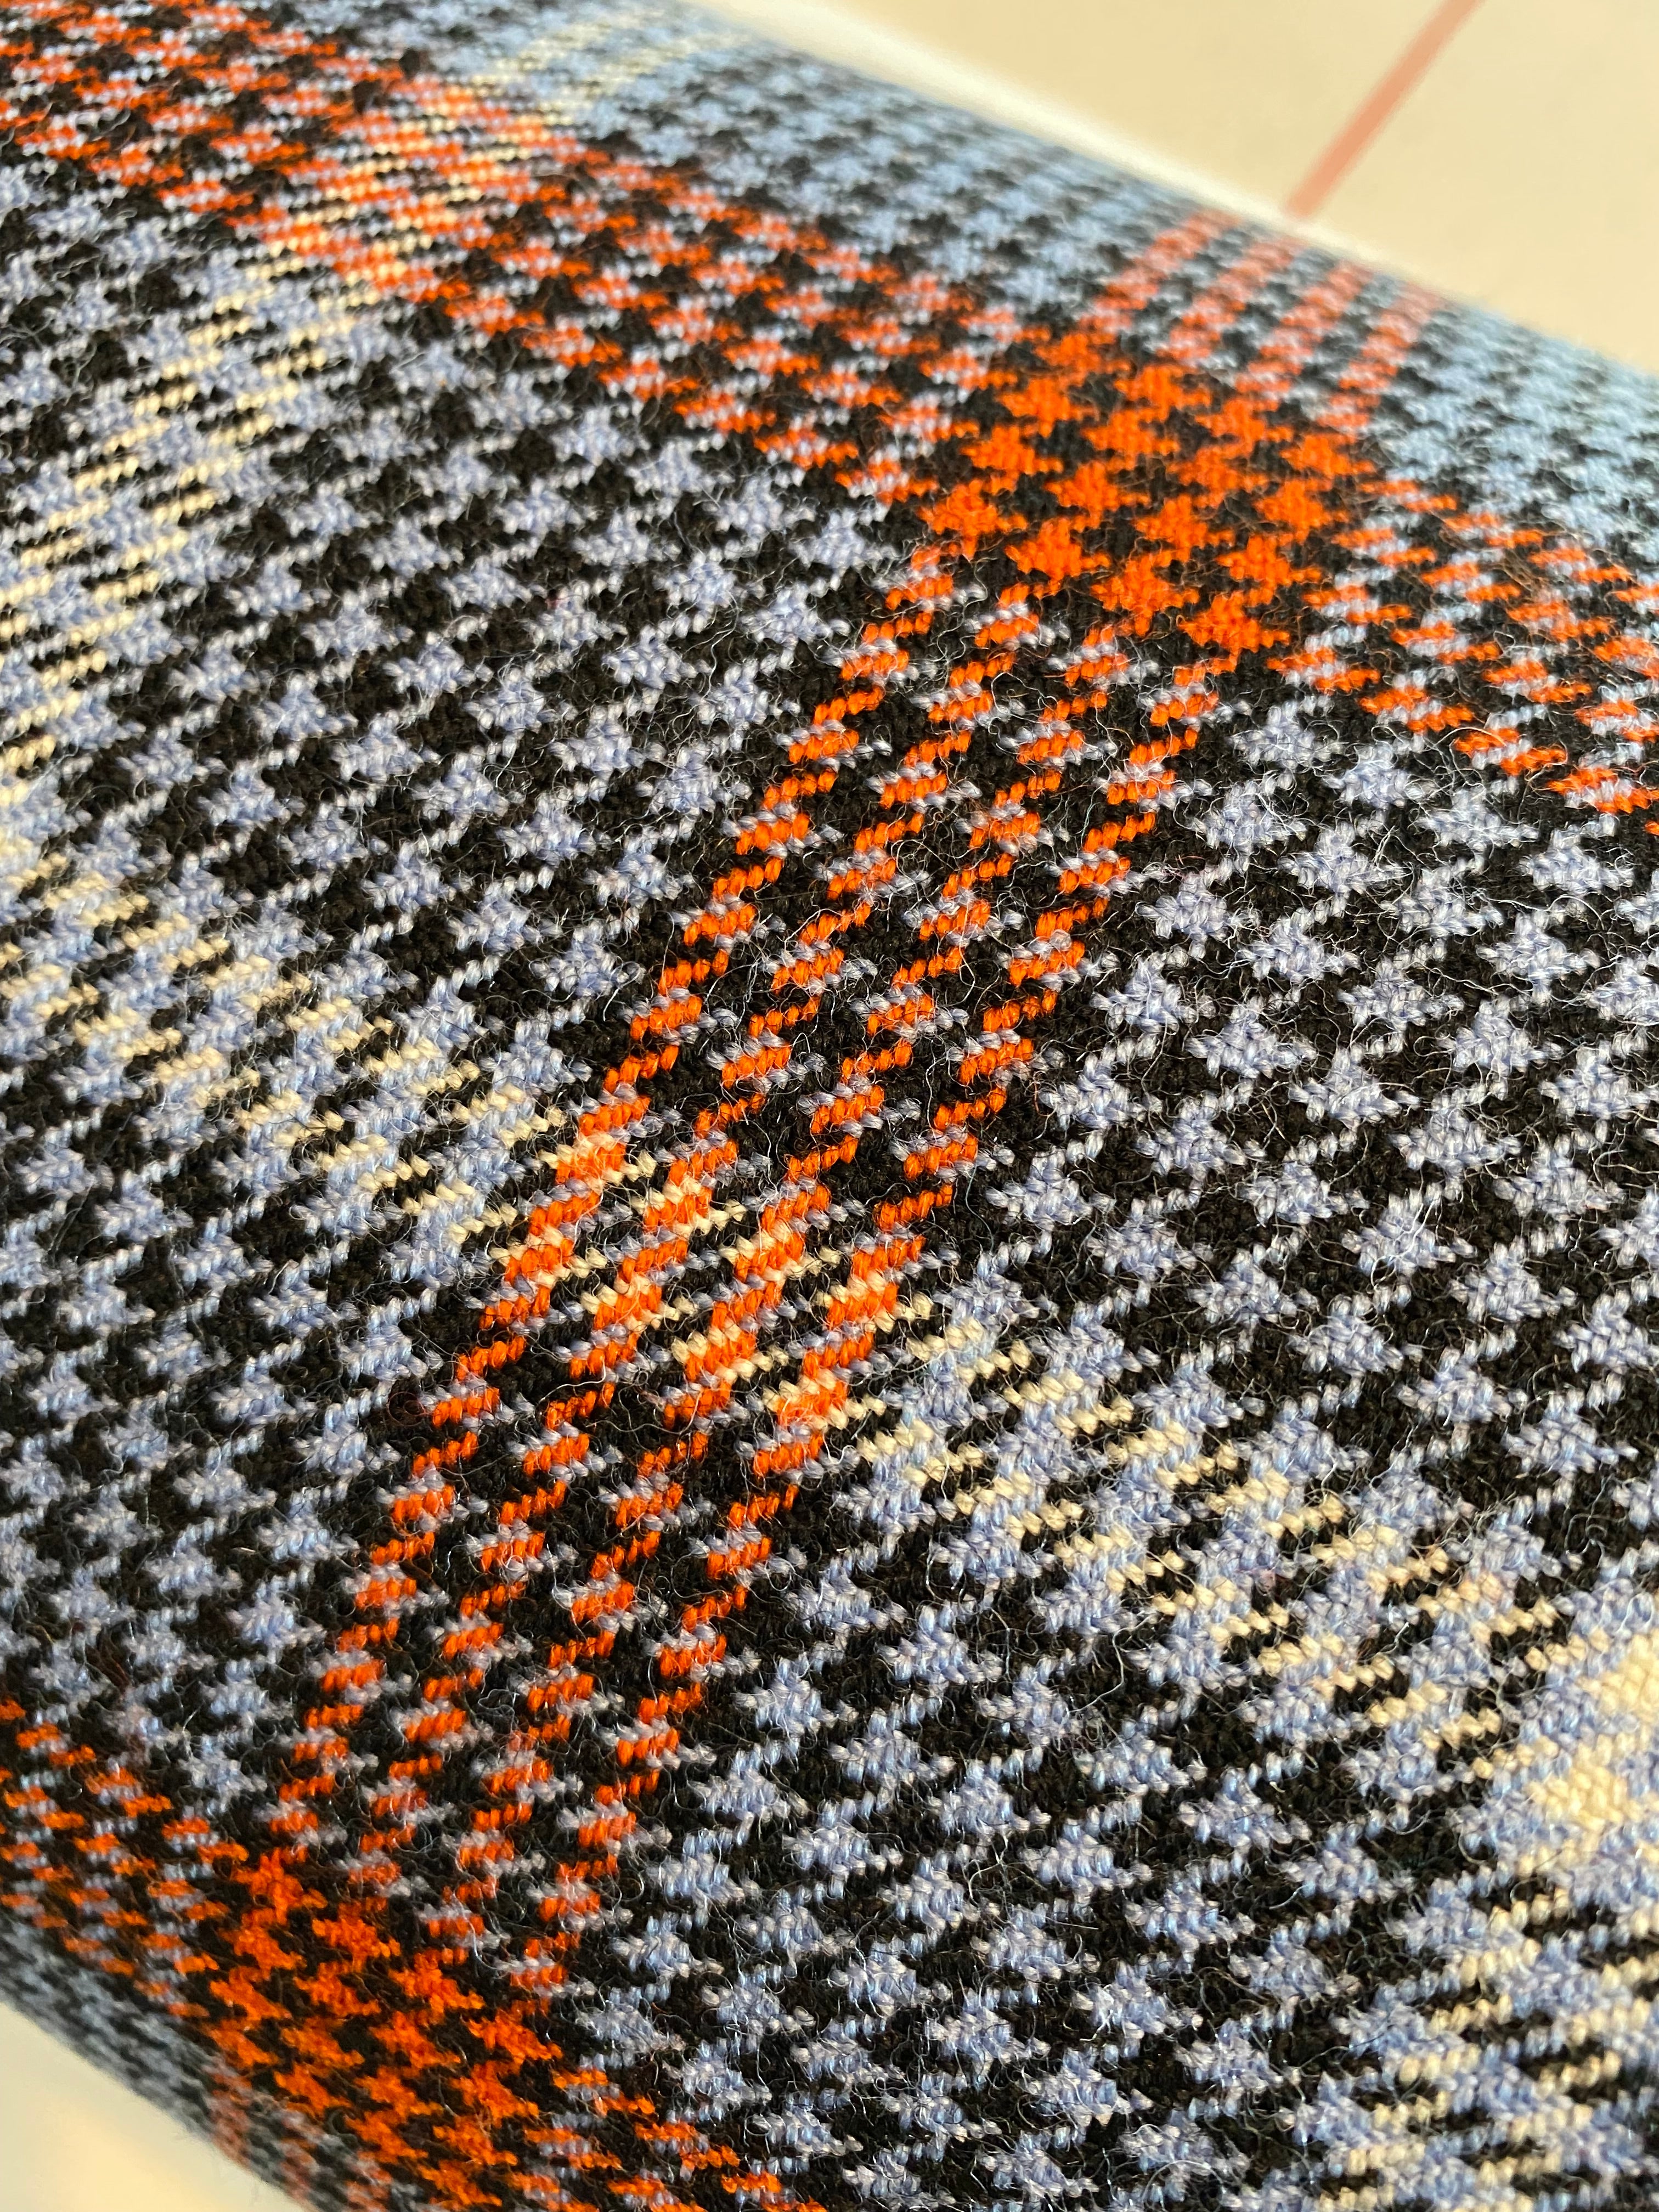 SOLM (Racing) Houndstooth WOOL Material only